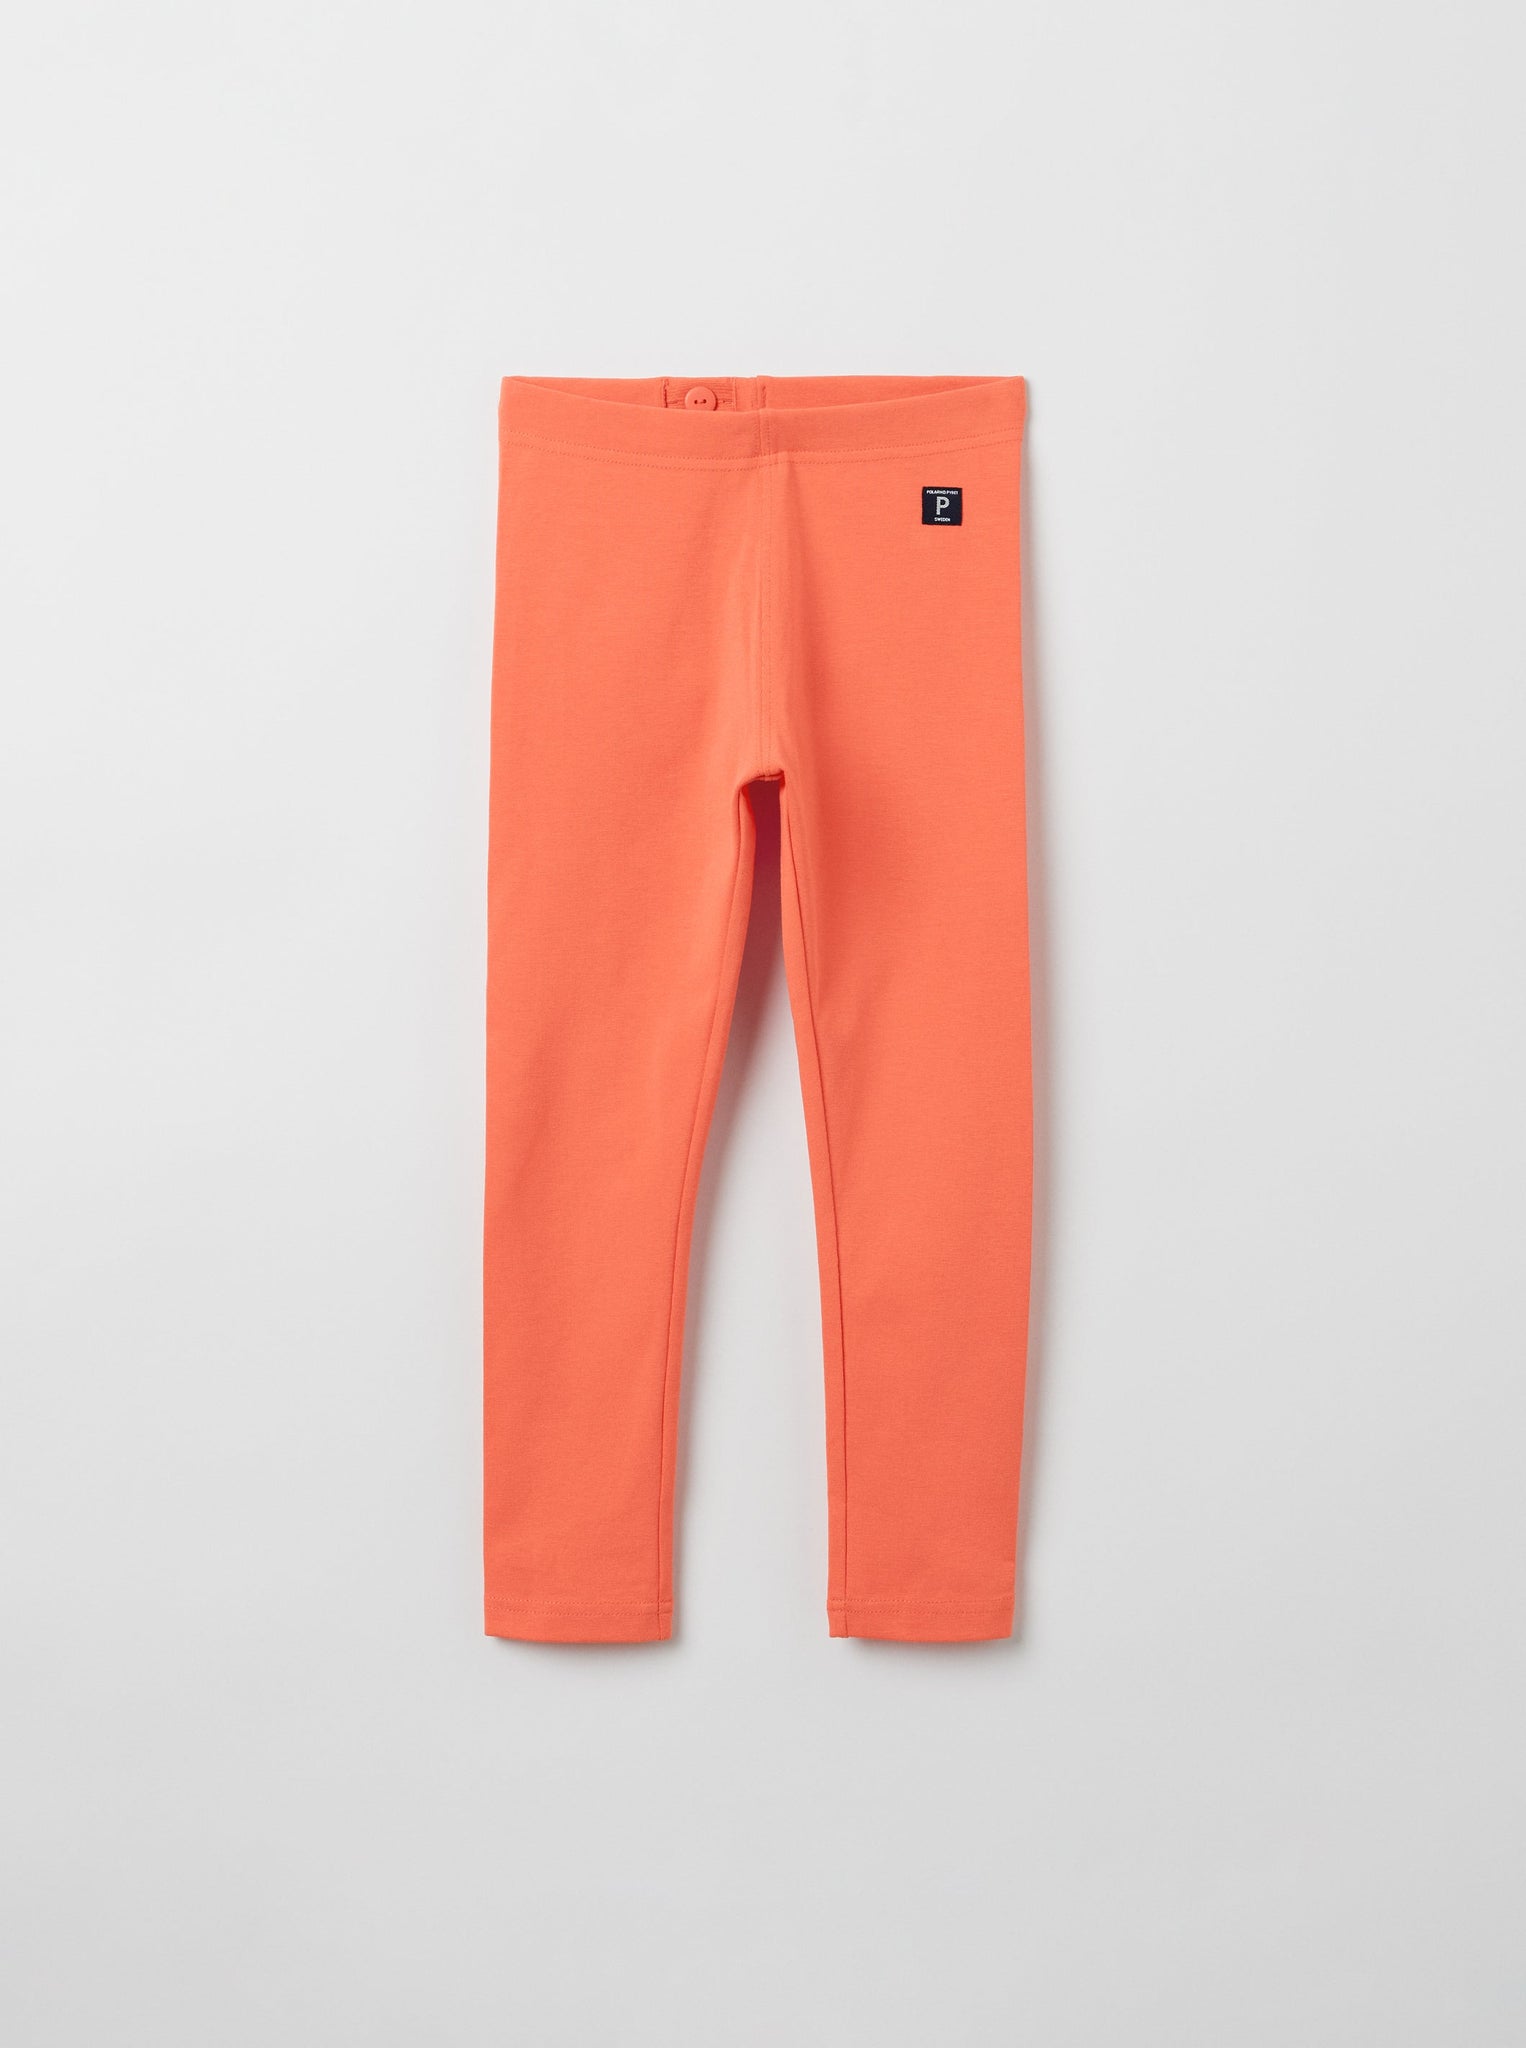 Organic Cotton Orange Kids Leggings from the Polarn O. Pyret kidswear collection. The best ethical kids clothes